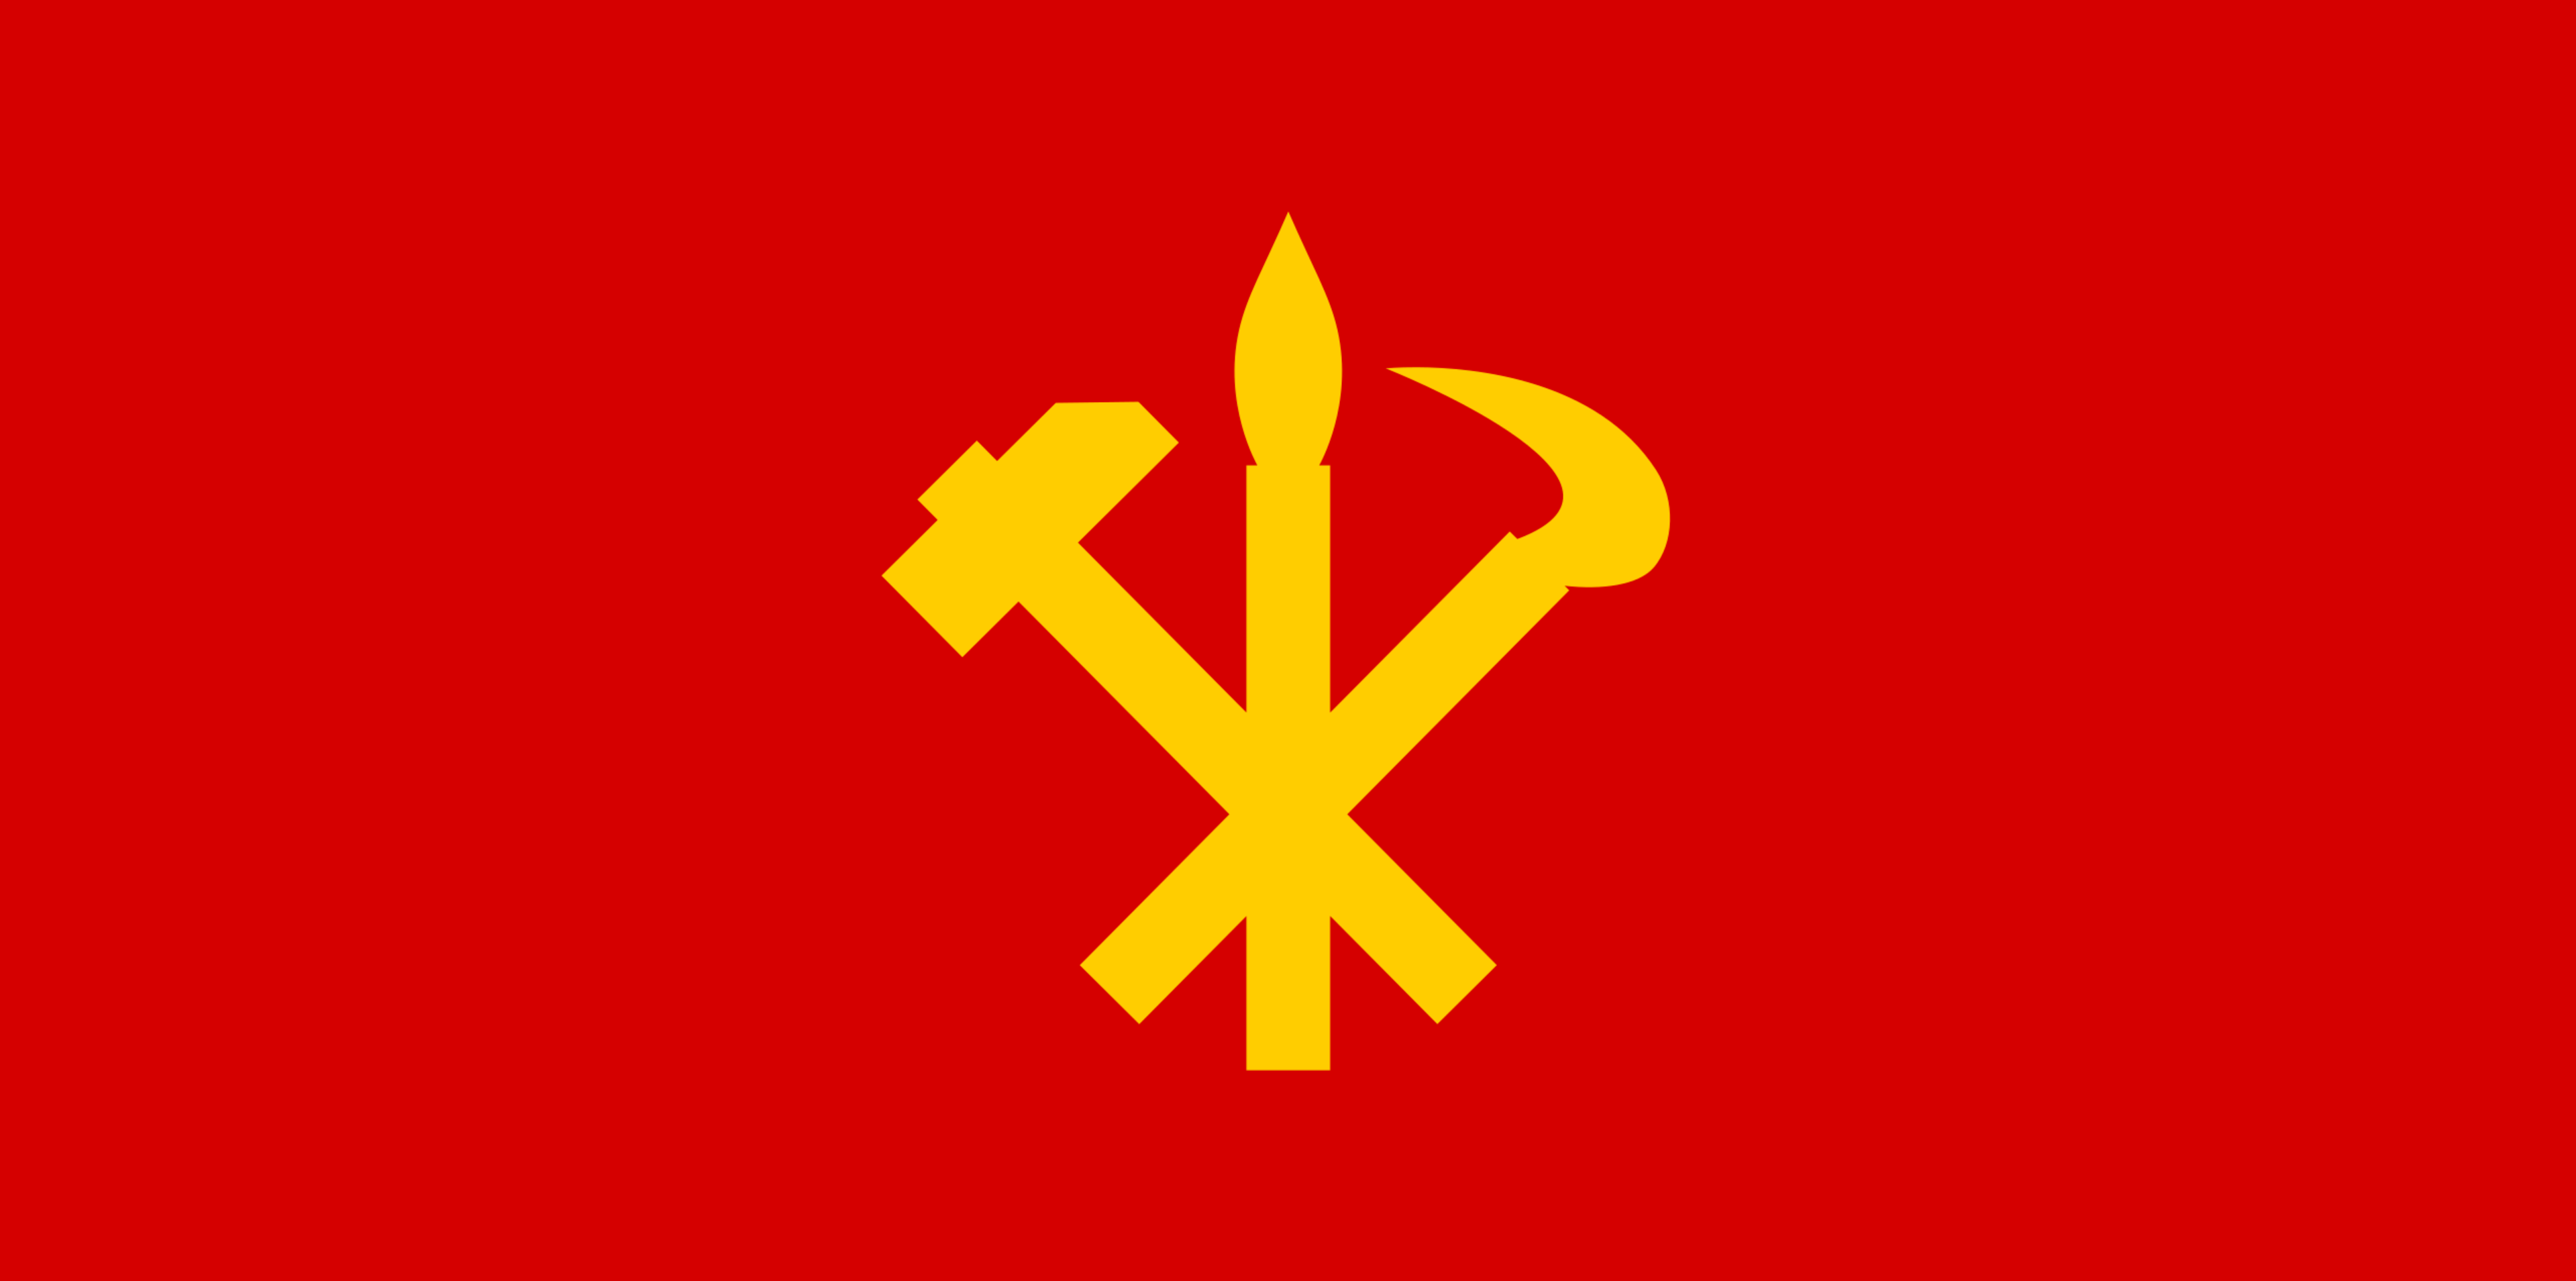 File:Flag of the Workers' Party of Korea.png